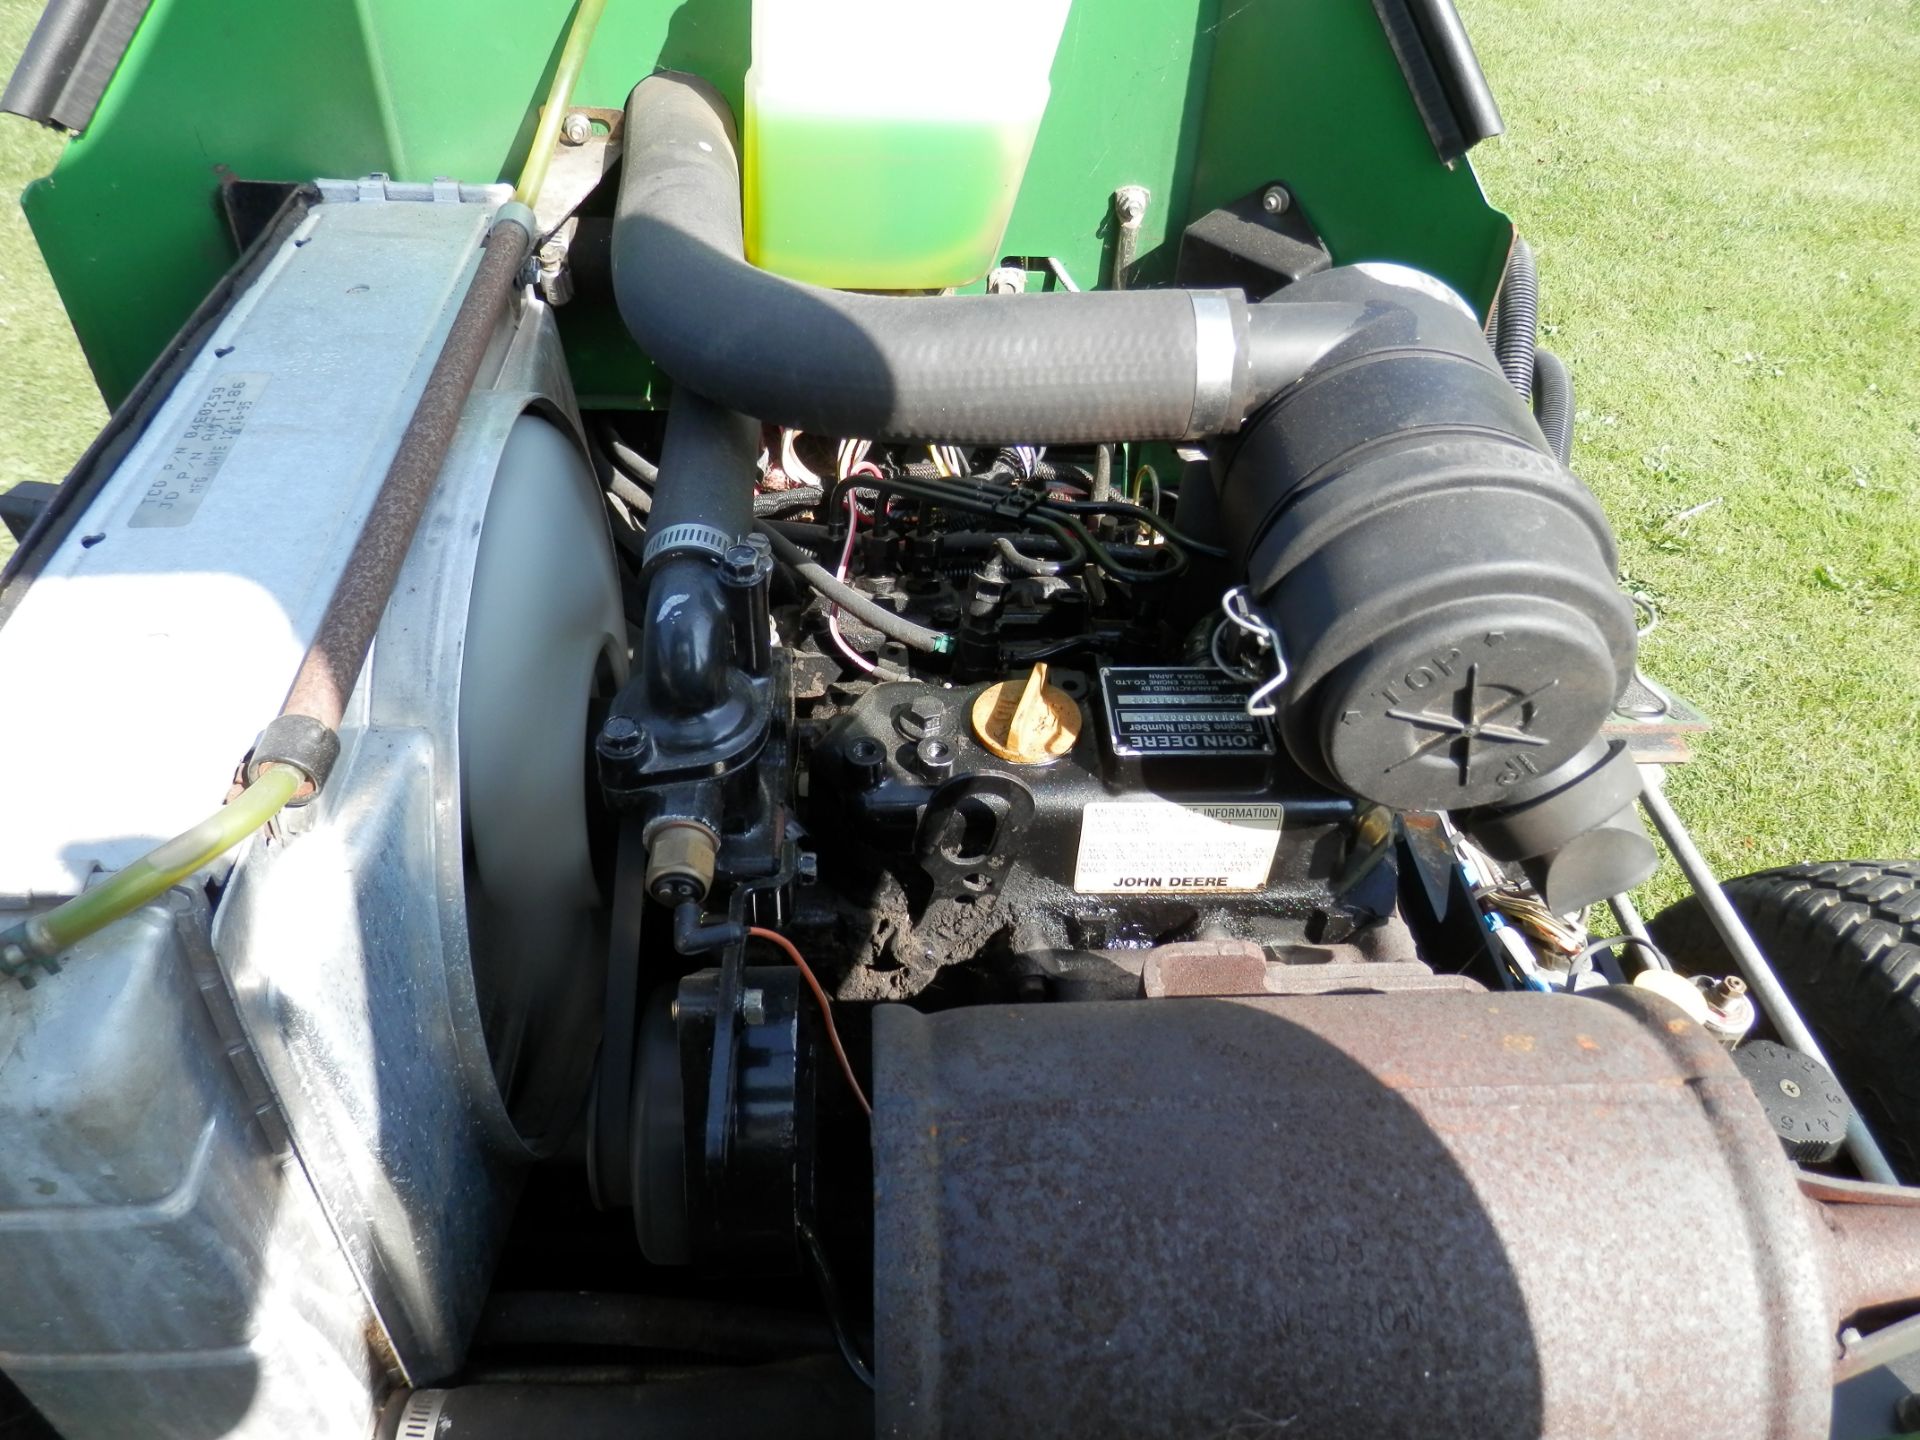 1996 JOHN DEERE 2653A RIDE ON GANG MOWER,CHECKED & WORKING. WIDE CUT, IDEAL FOR ESTATES/GOLF COURSES - Image 9 of 11